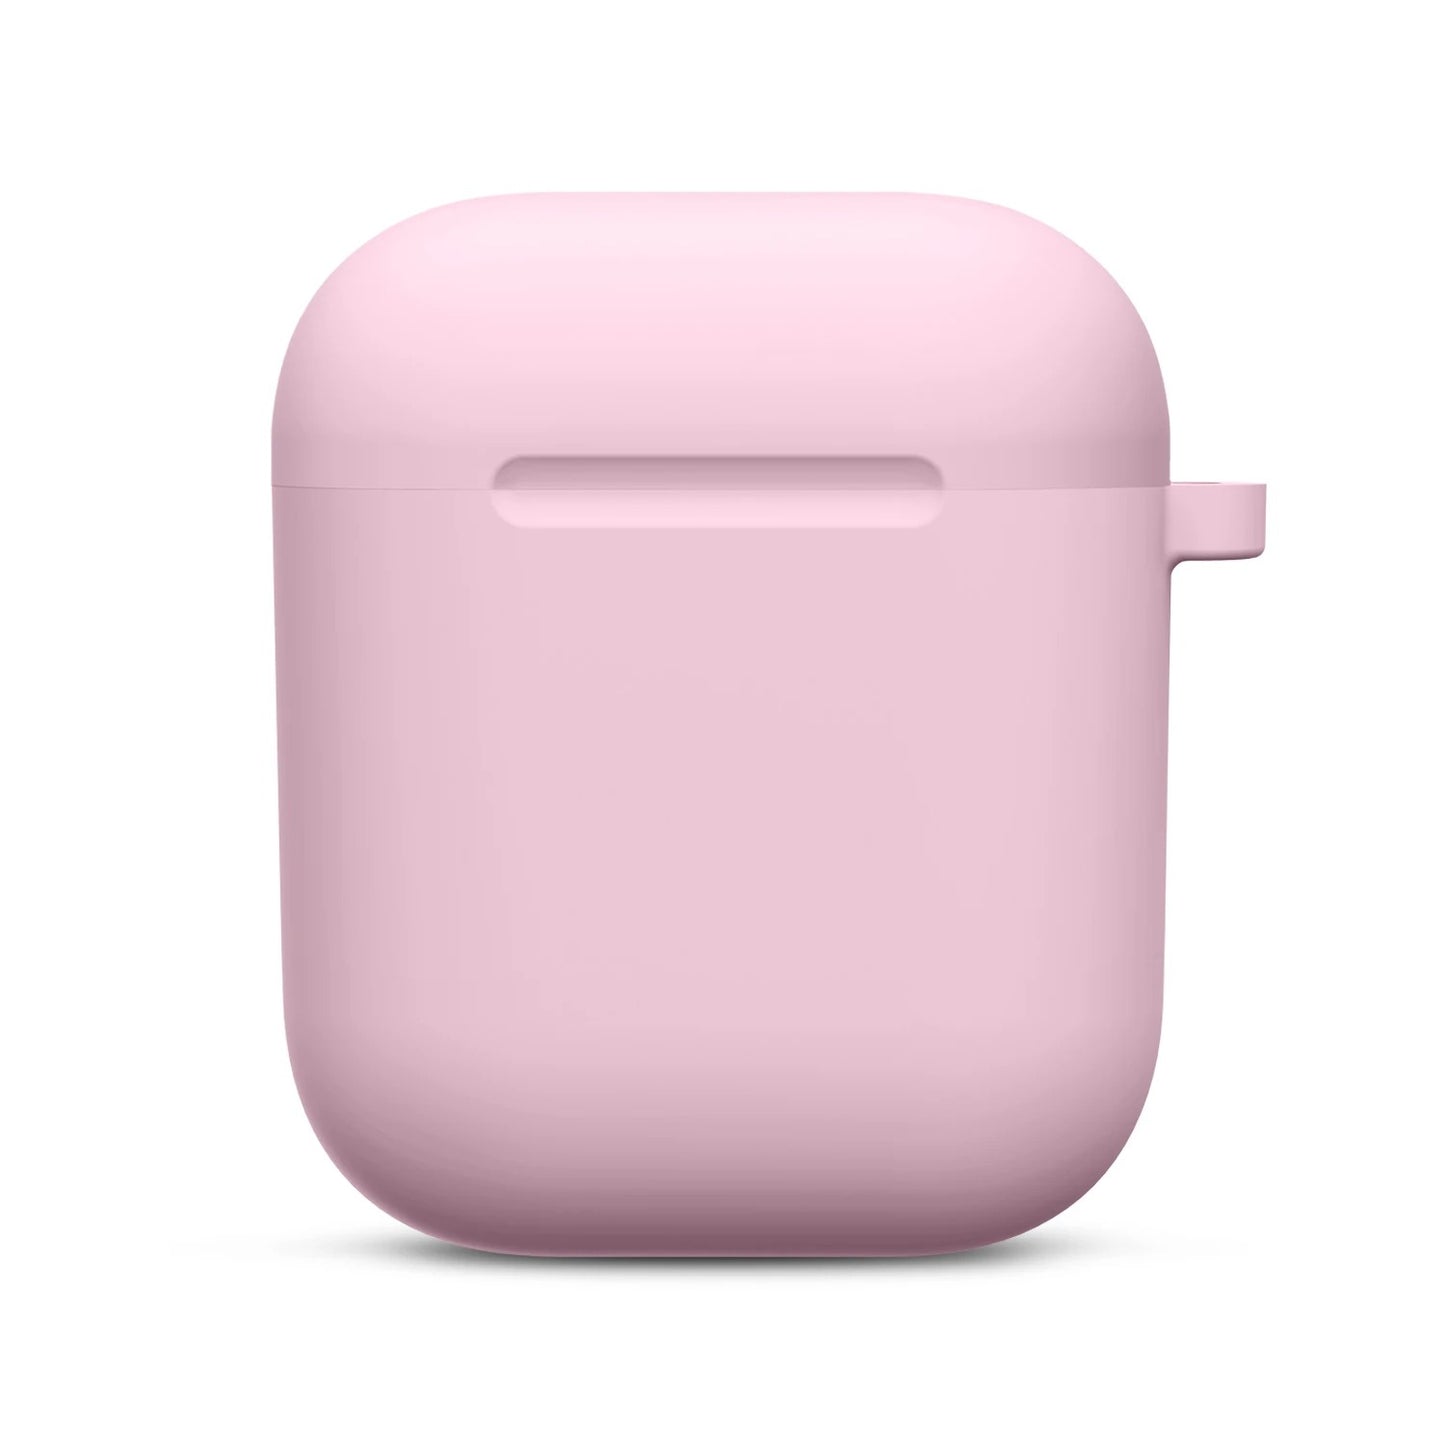 Apple Airpods case 1st, 2nd generation